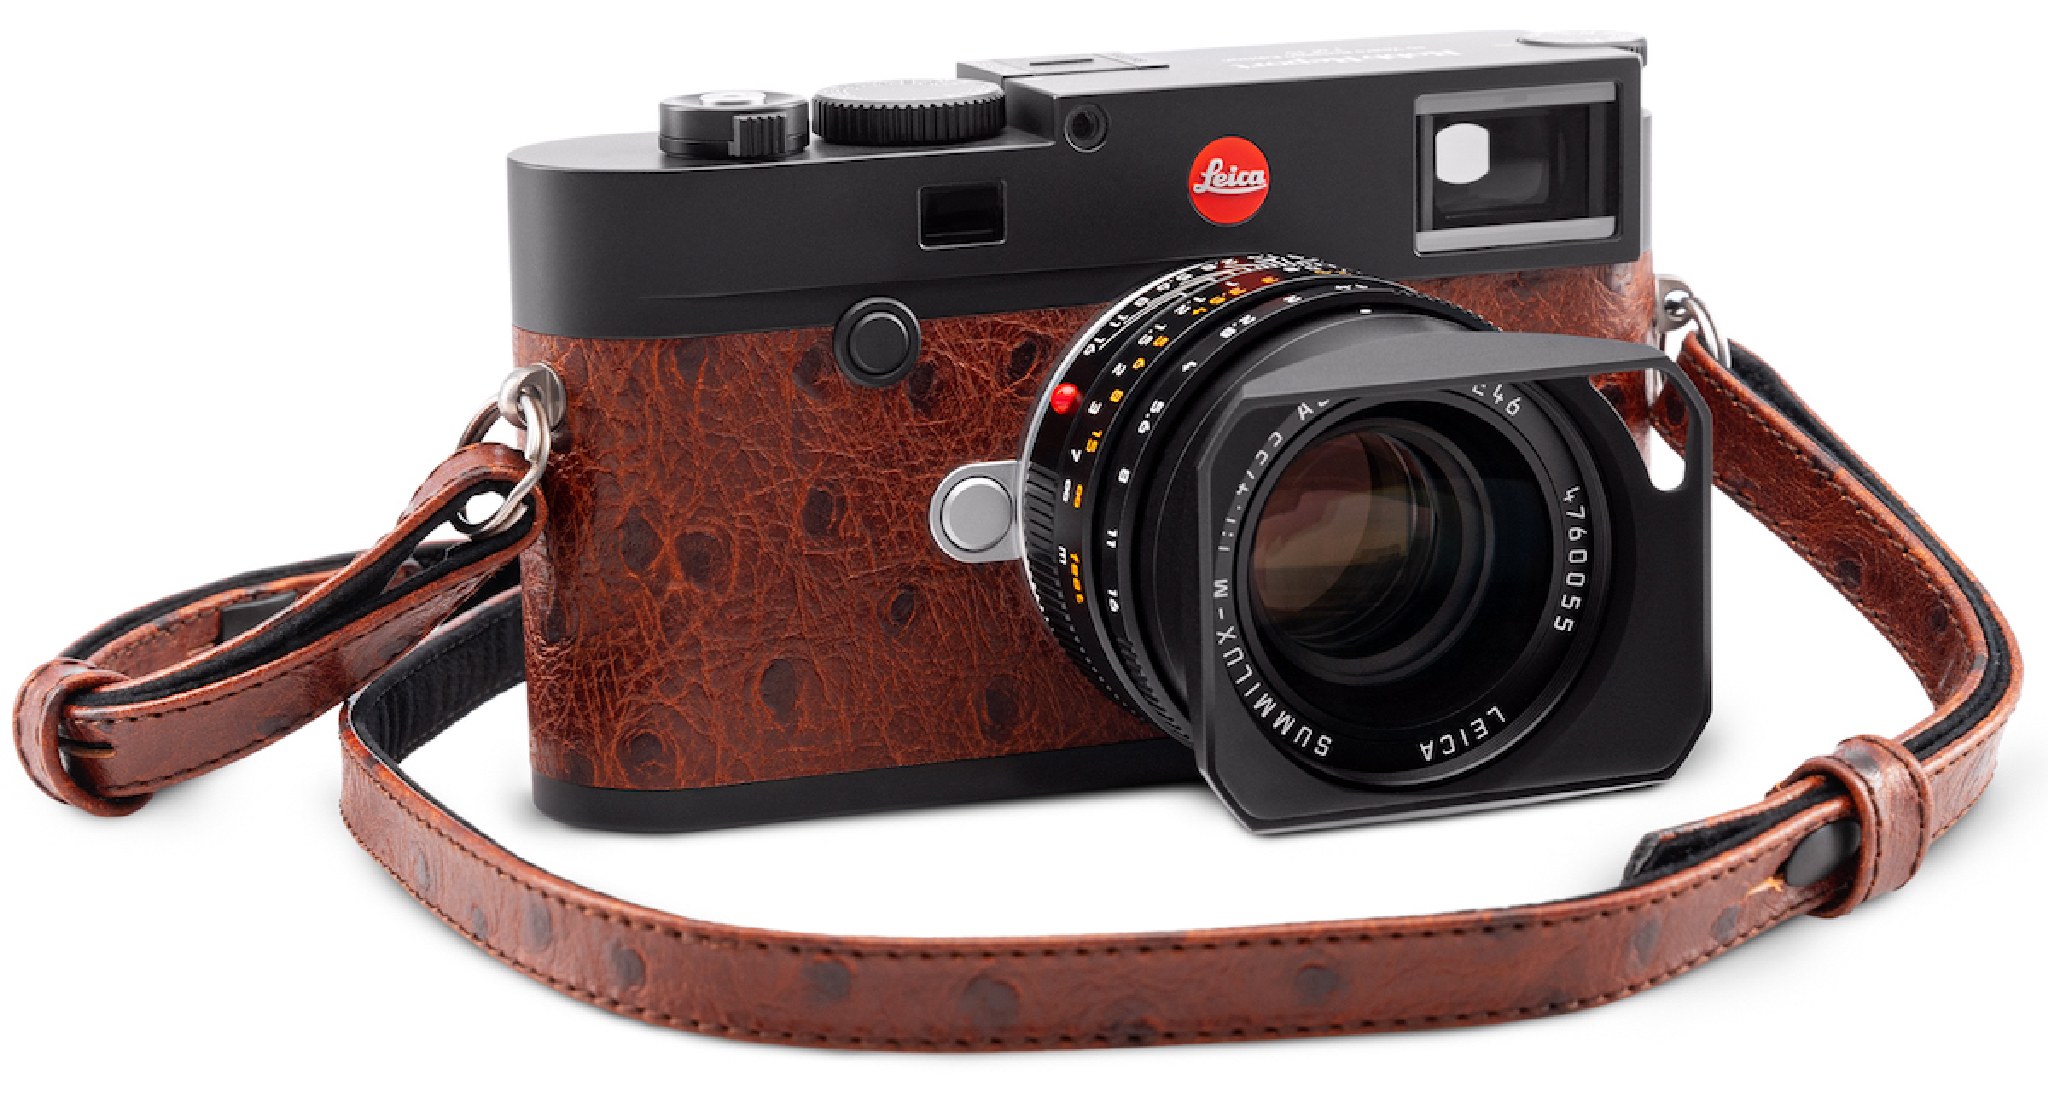 Leica-M10-Robb-Report-Russia-15-years-limited-edition-camera-6.jpg